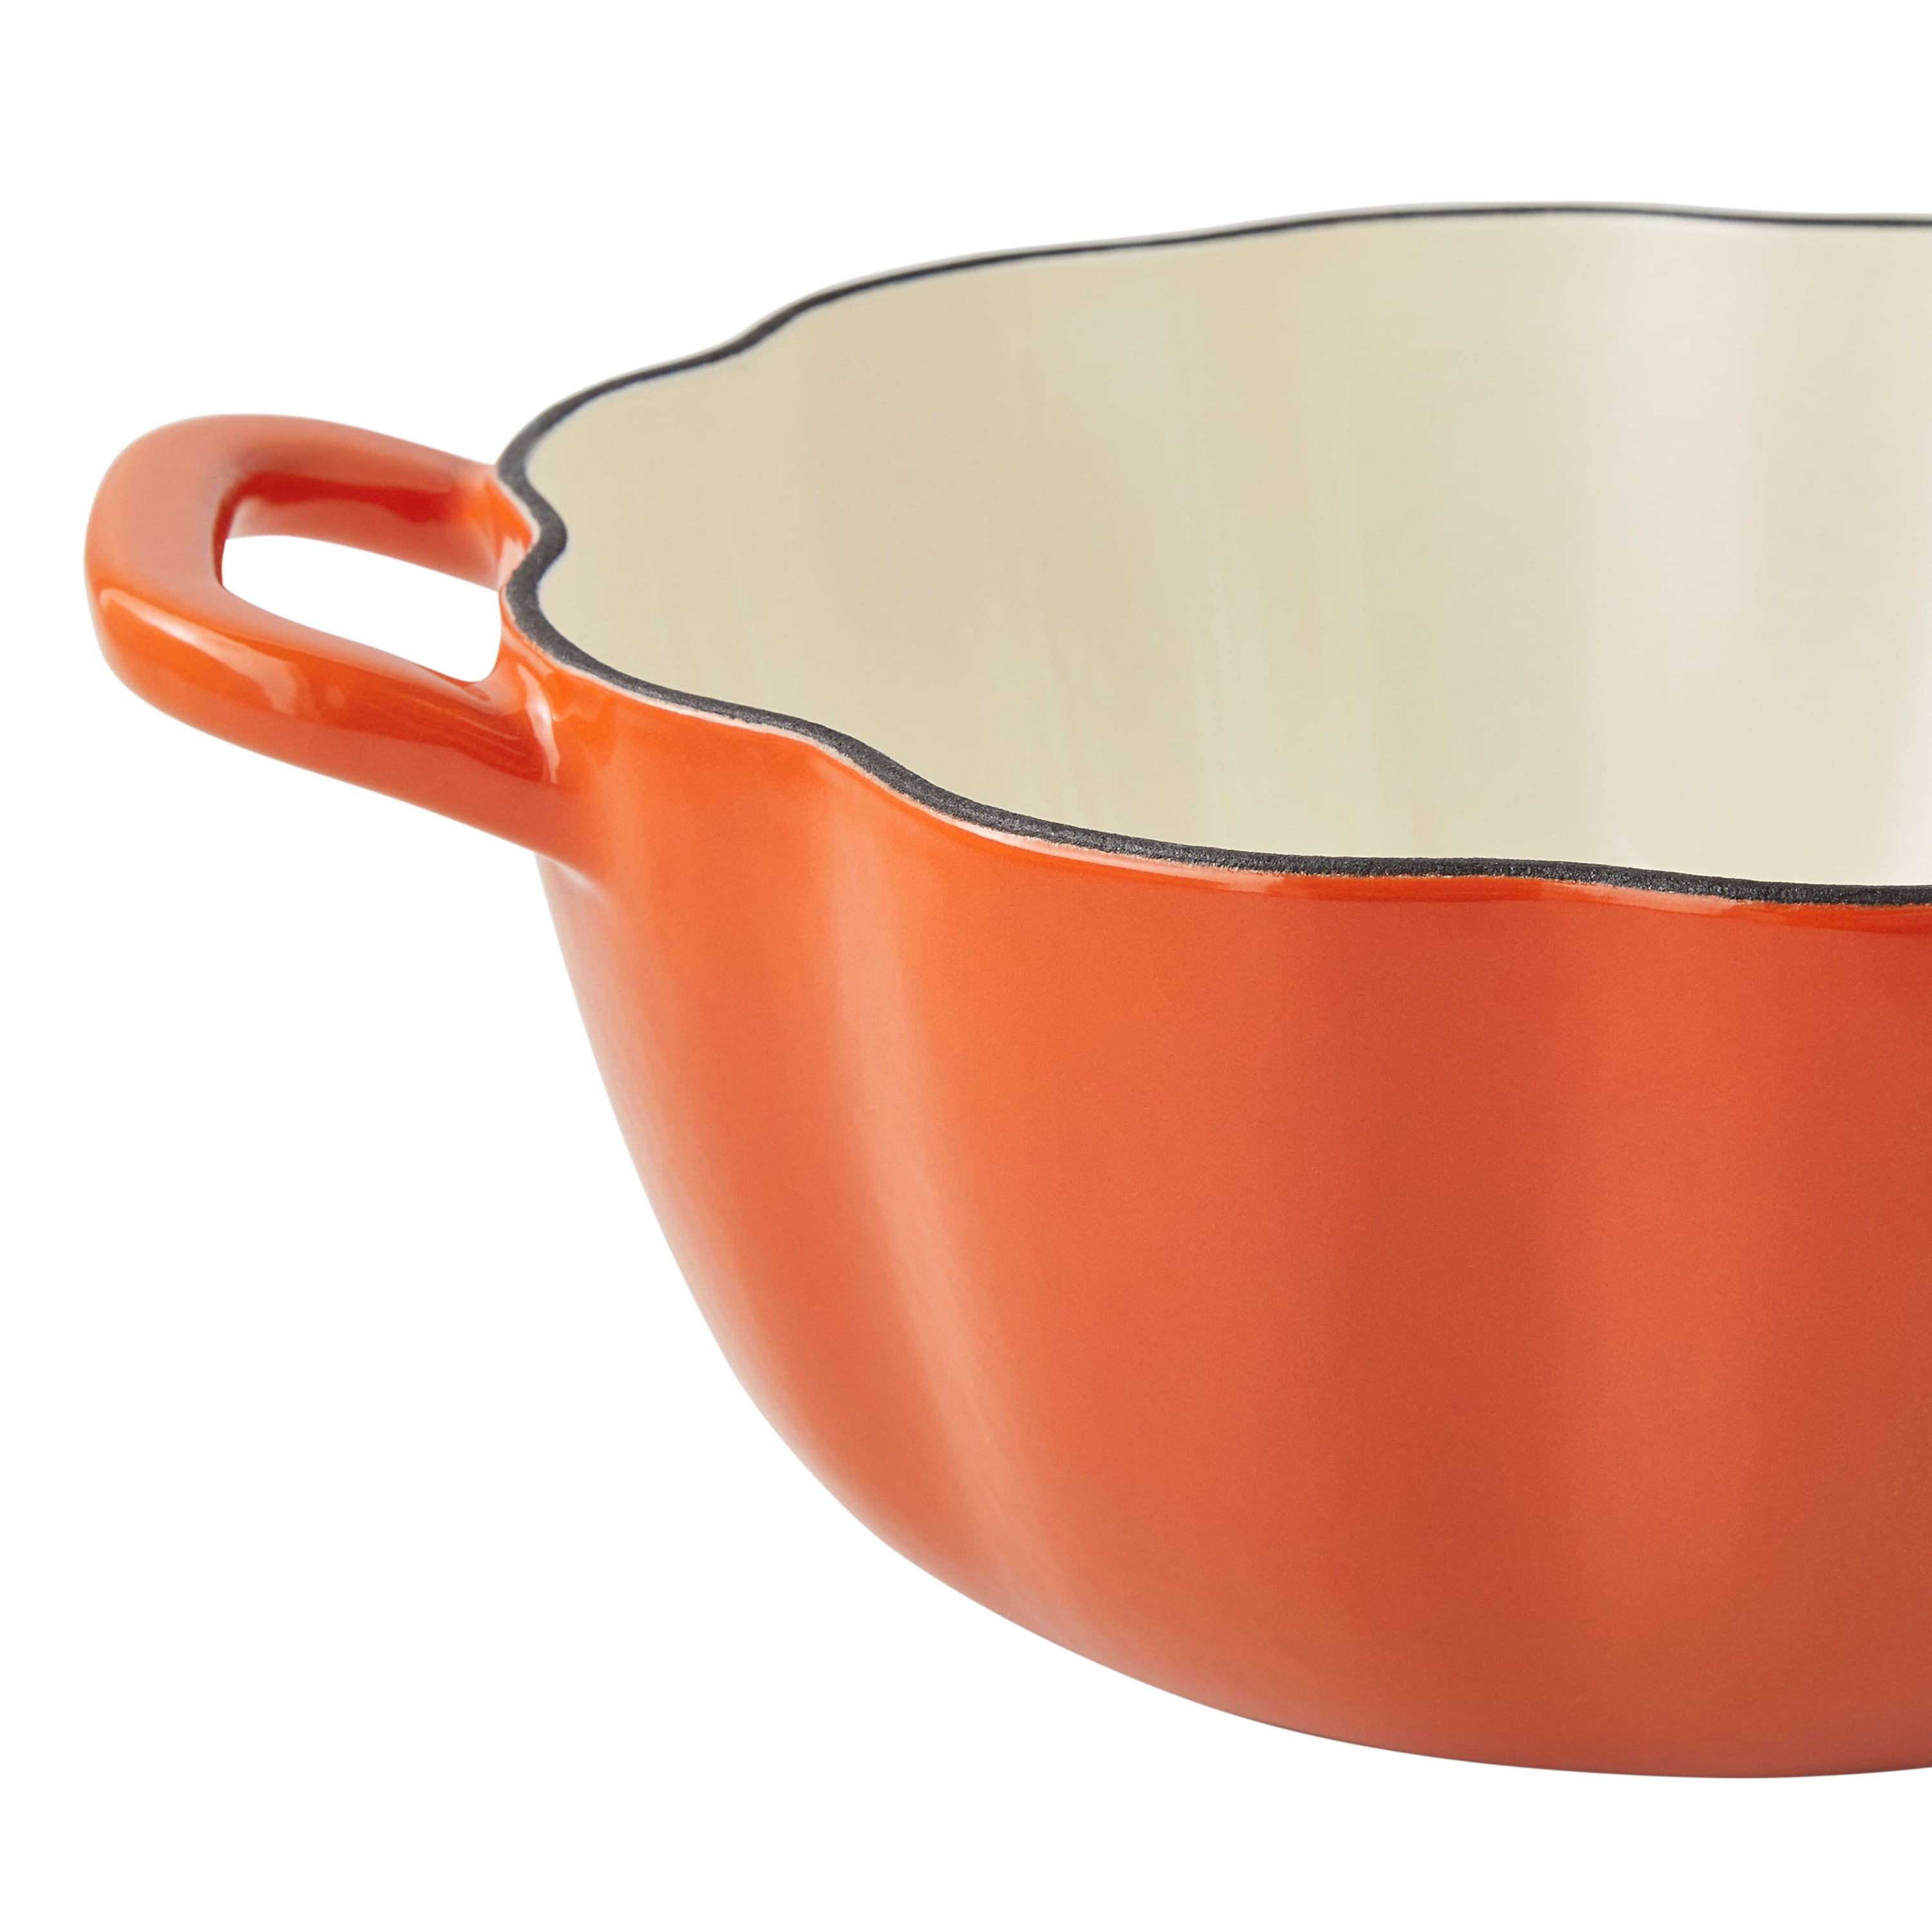 The Pioneer Woman Pumpkin Dutch Oven Is Back in Stock for 2023